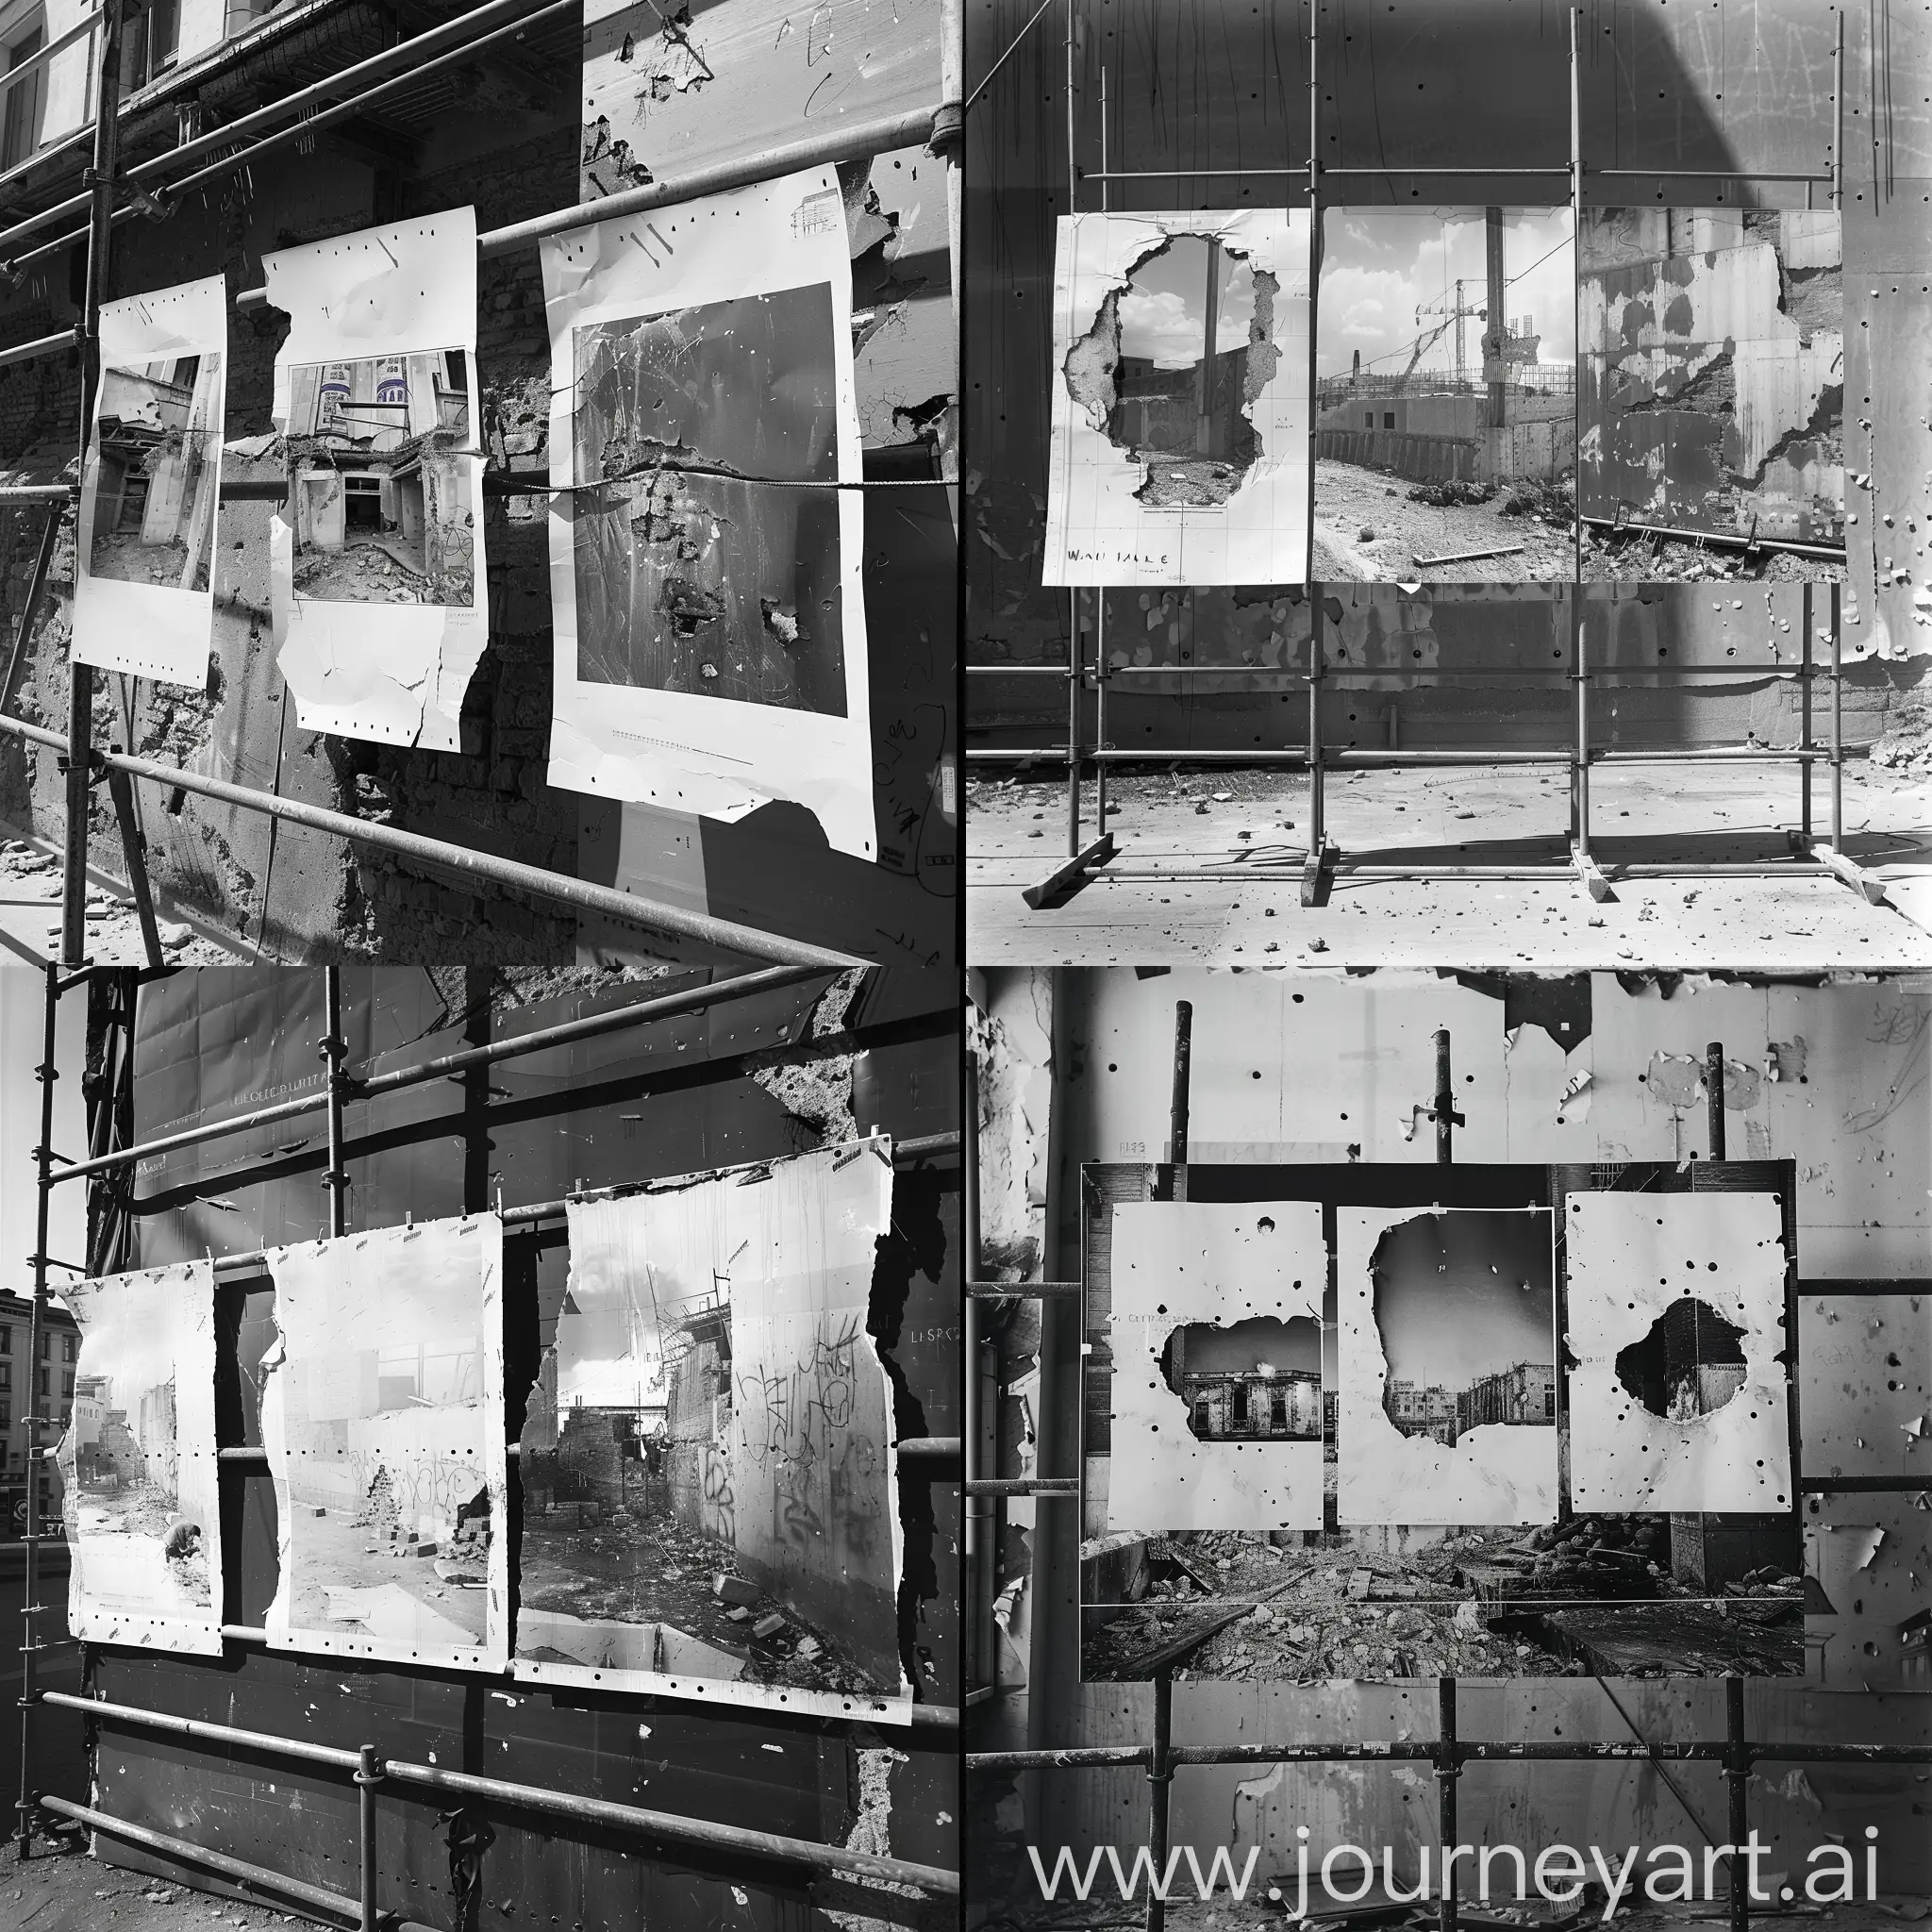 Vintage-Black-and-White-Photo-Exhibition-of-Construction-Sites-on-Scaffolding